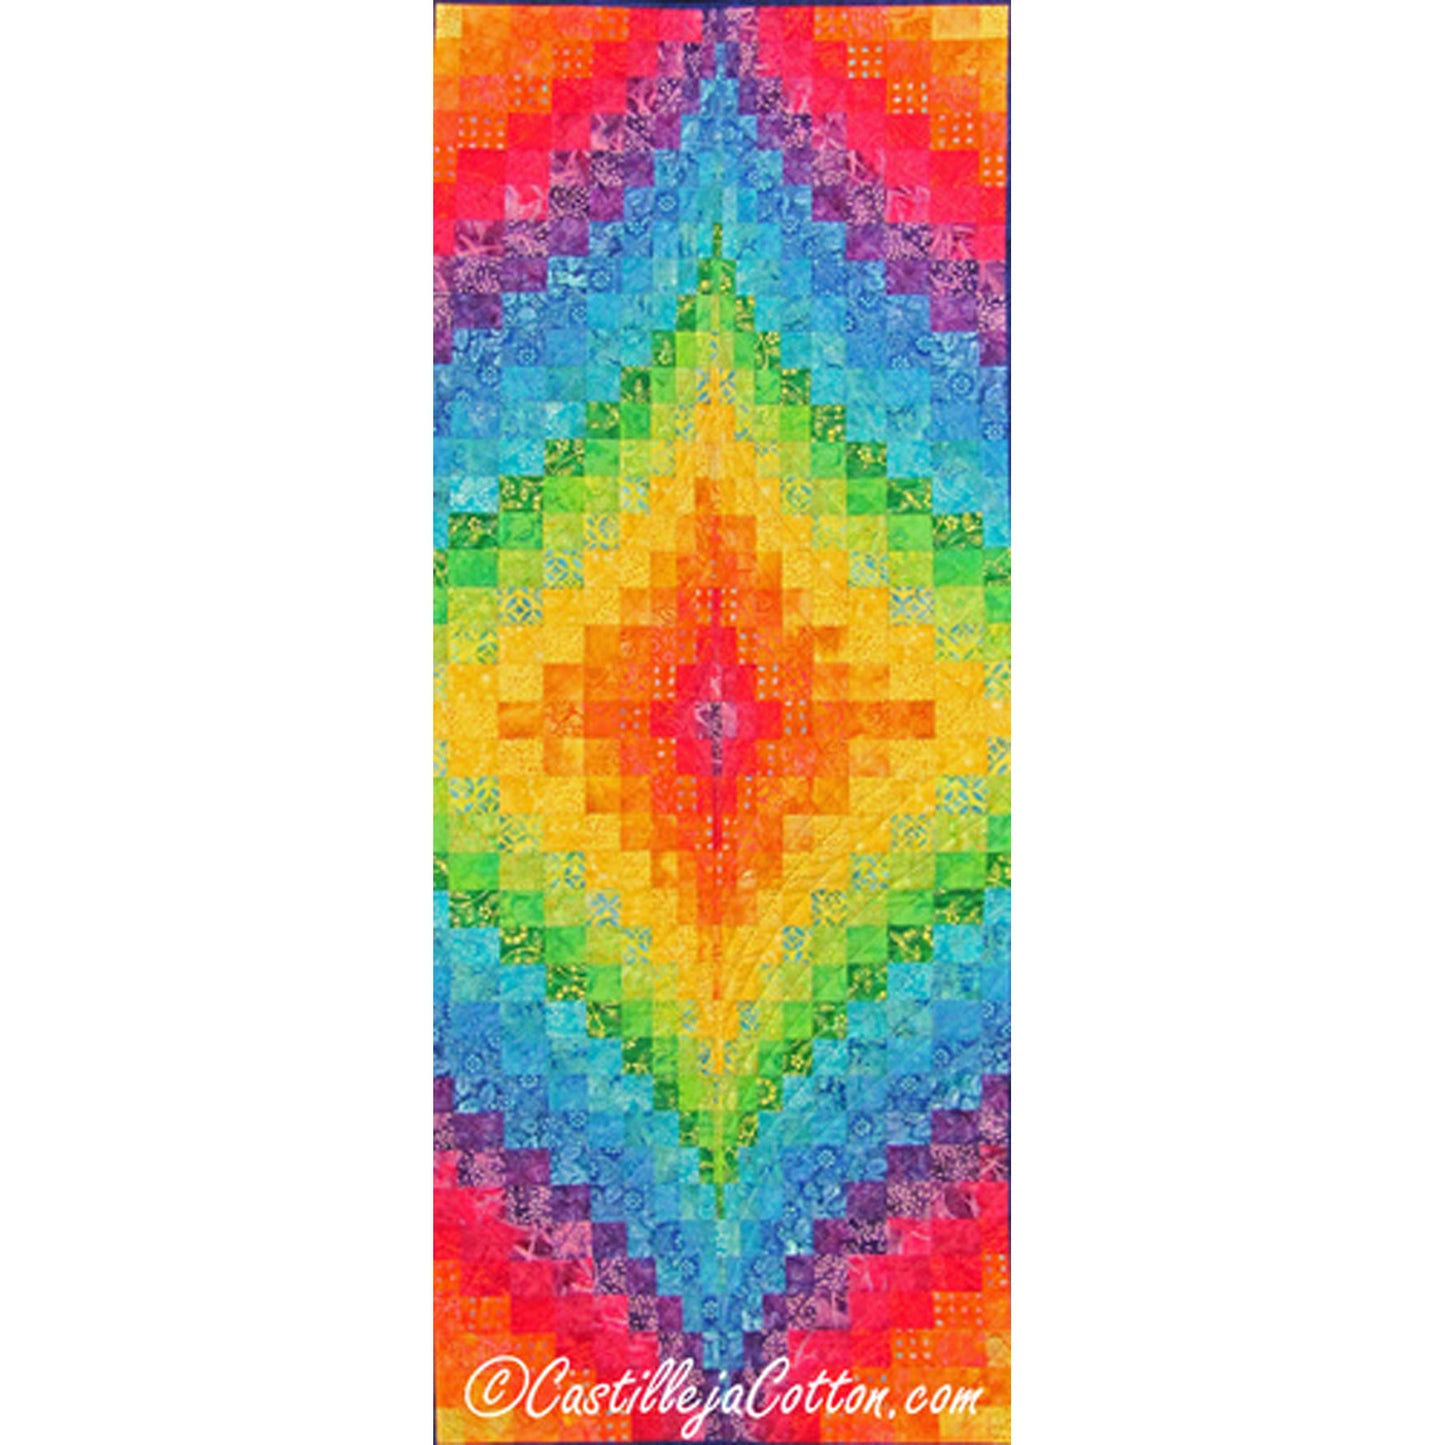 Colorful rainbow quilted table runner or wall hanging with a central star or Bargello design.